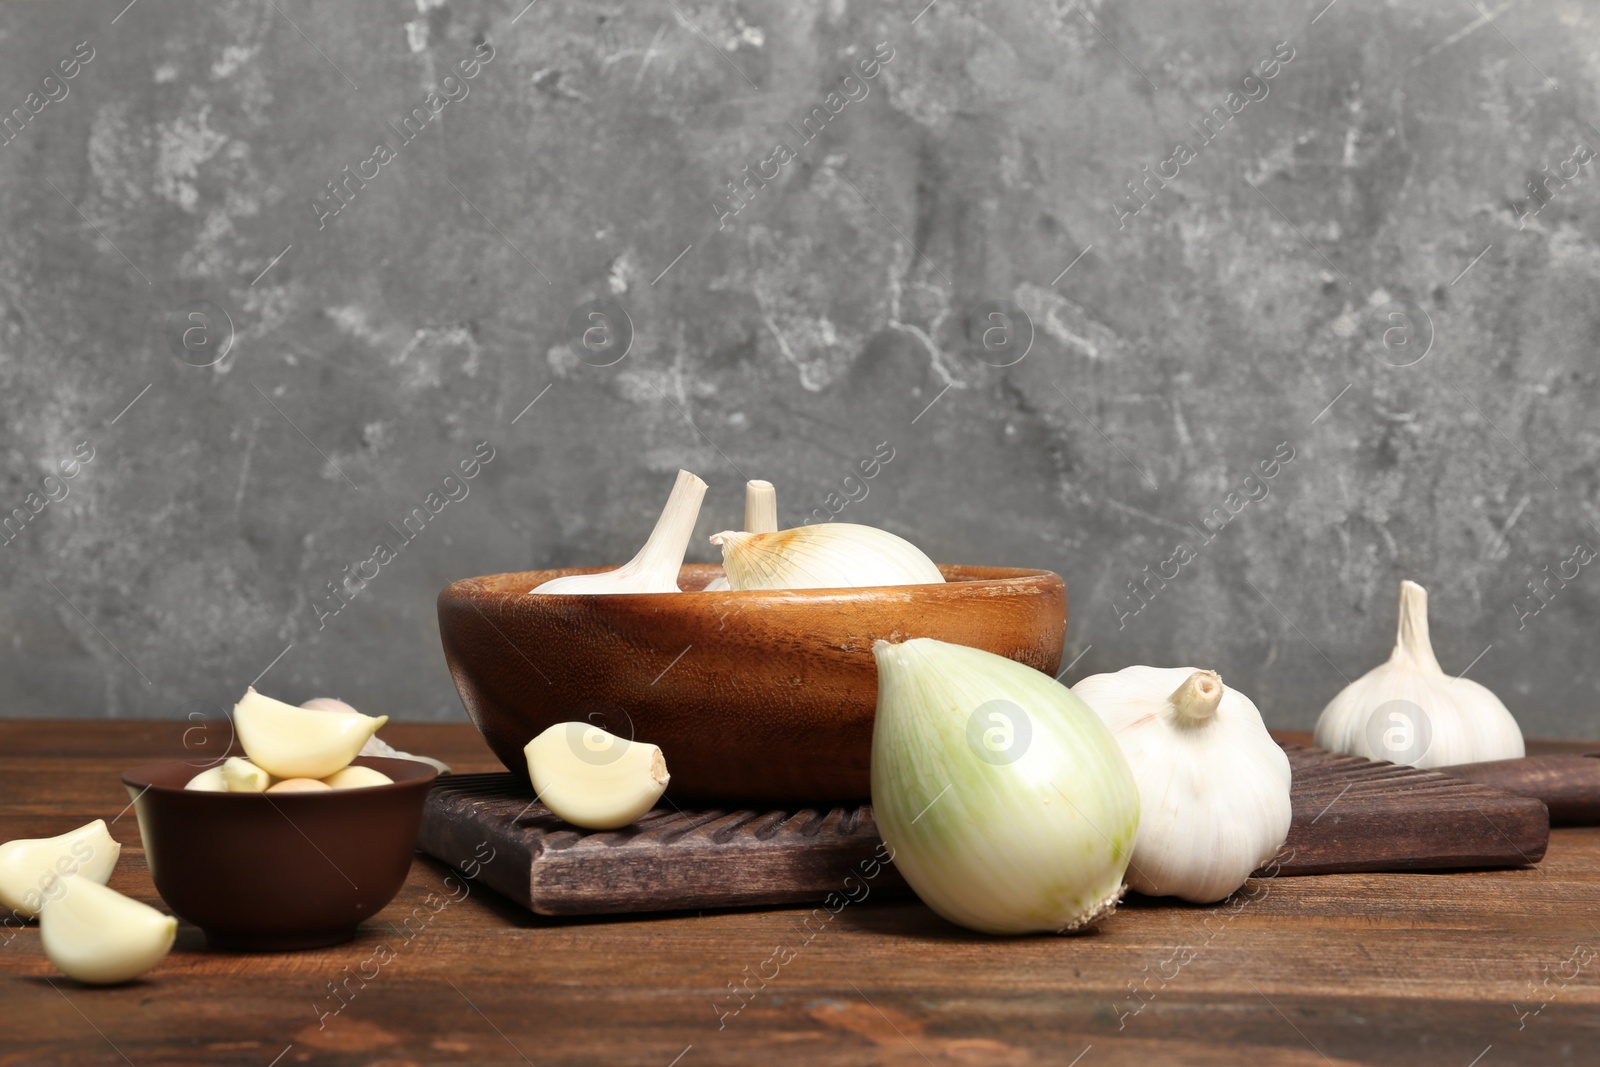 Photo of Composition with onion and garlic on wooden table